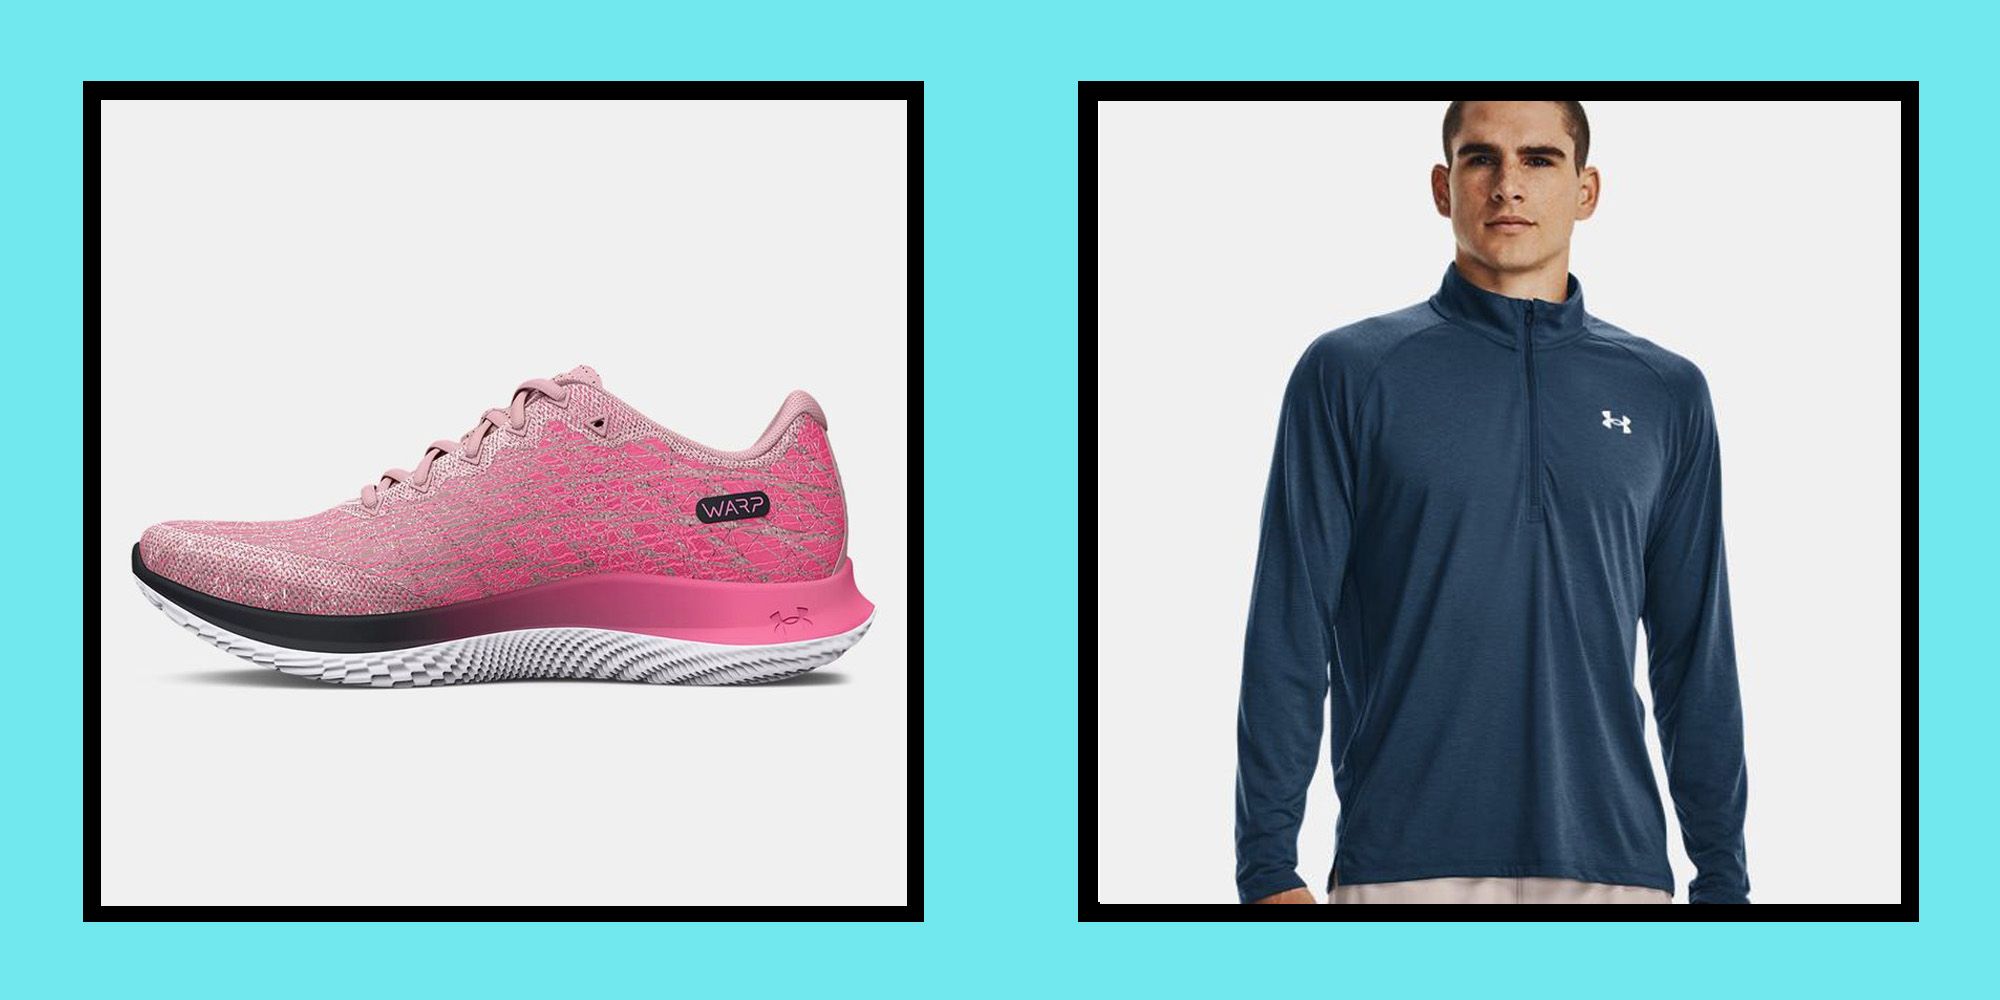 granja como eso radiador The best deals for runners in the Under Armour Cyber Monday sale